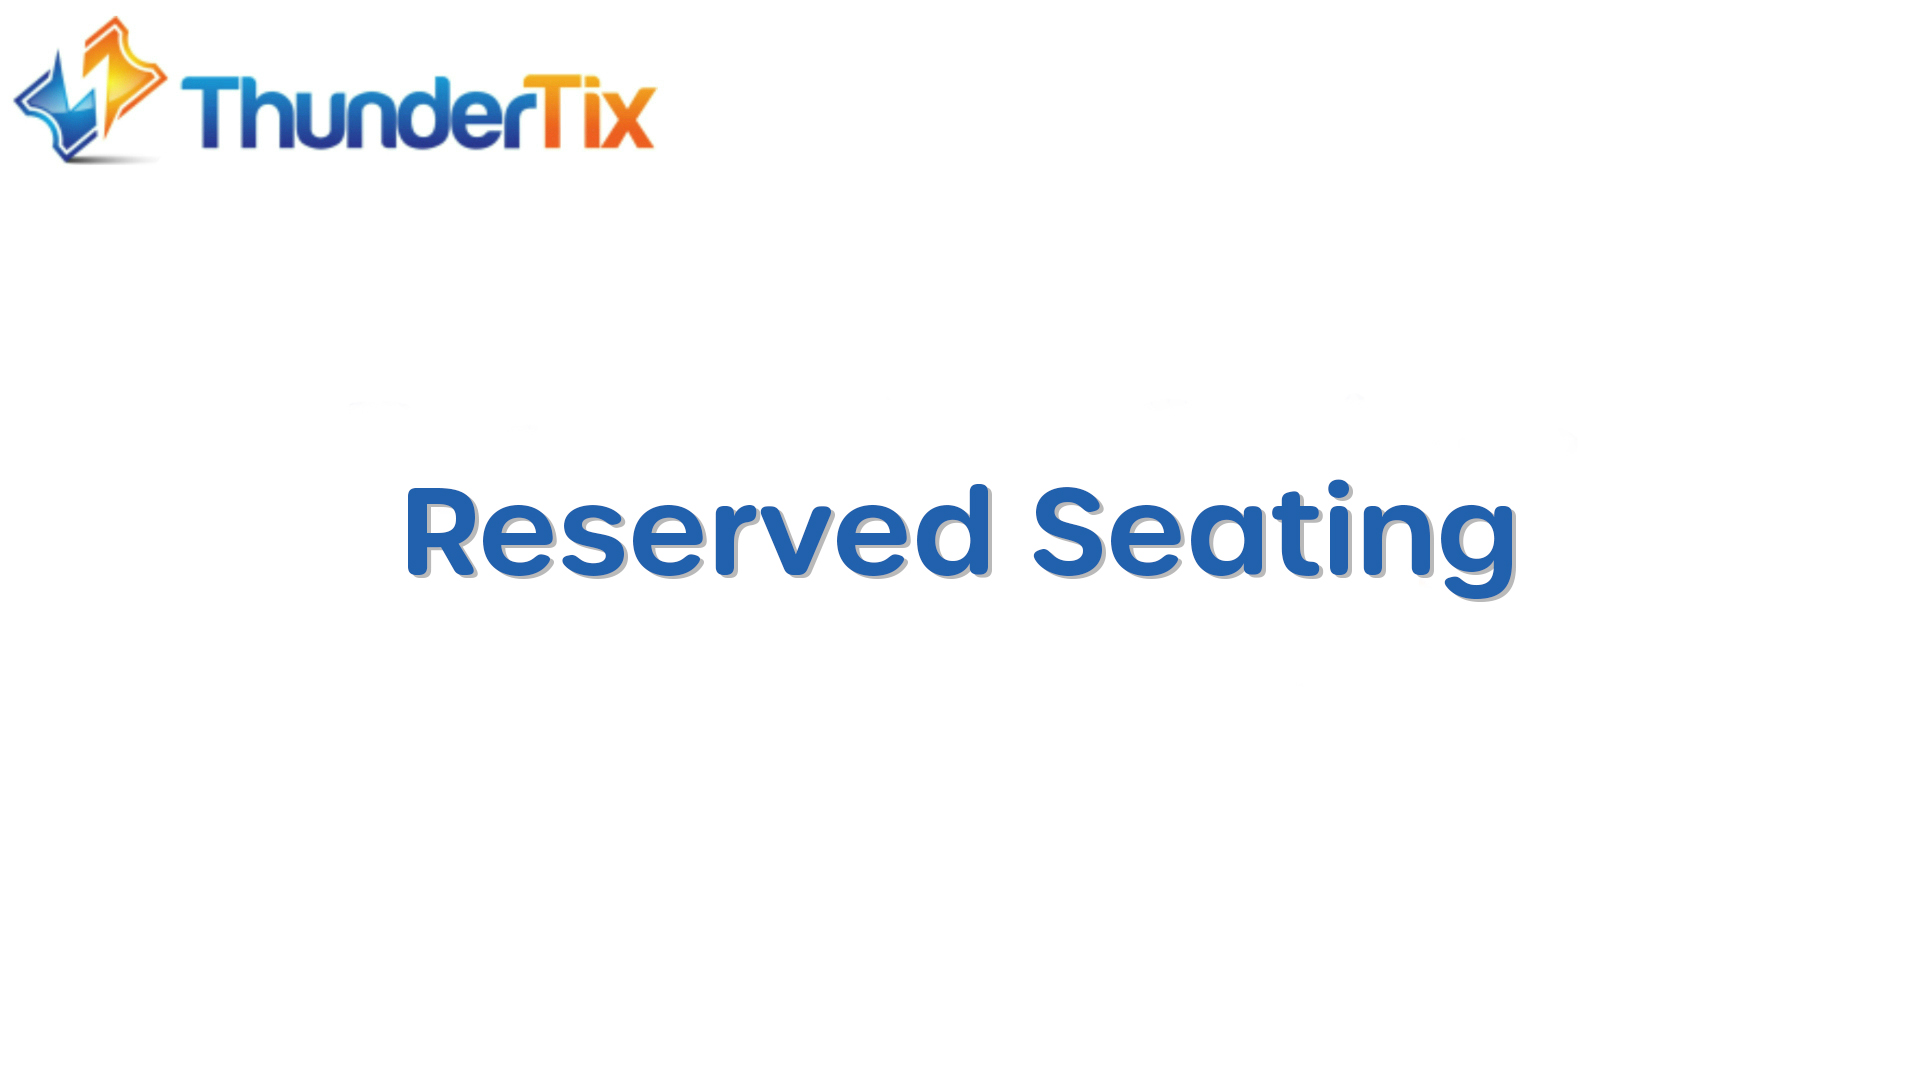 Reserved Seating Tutorial Video